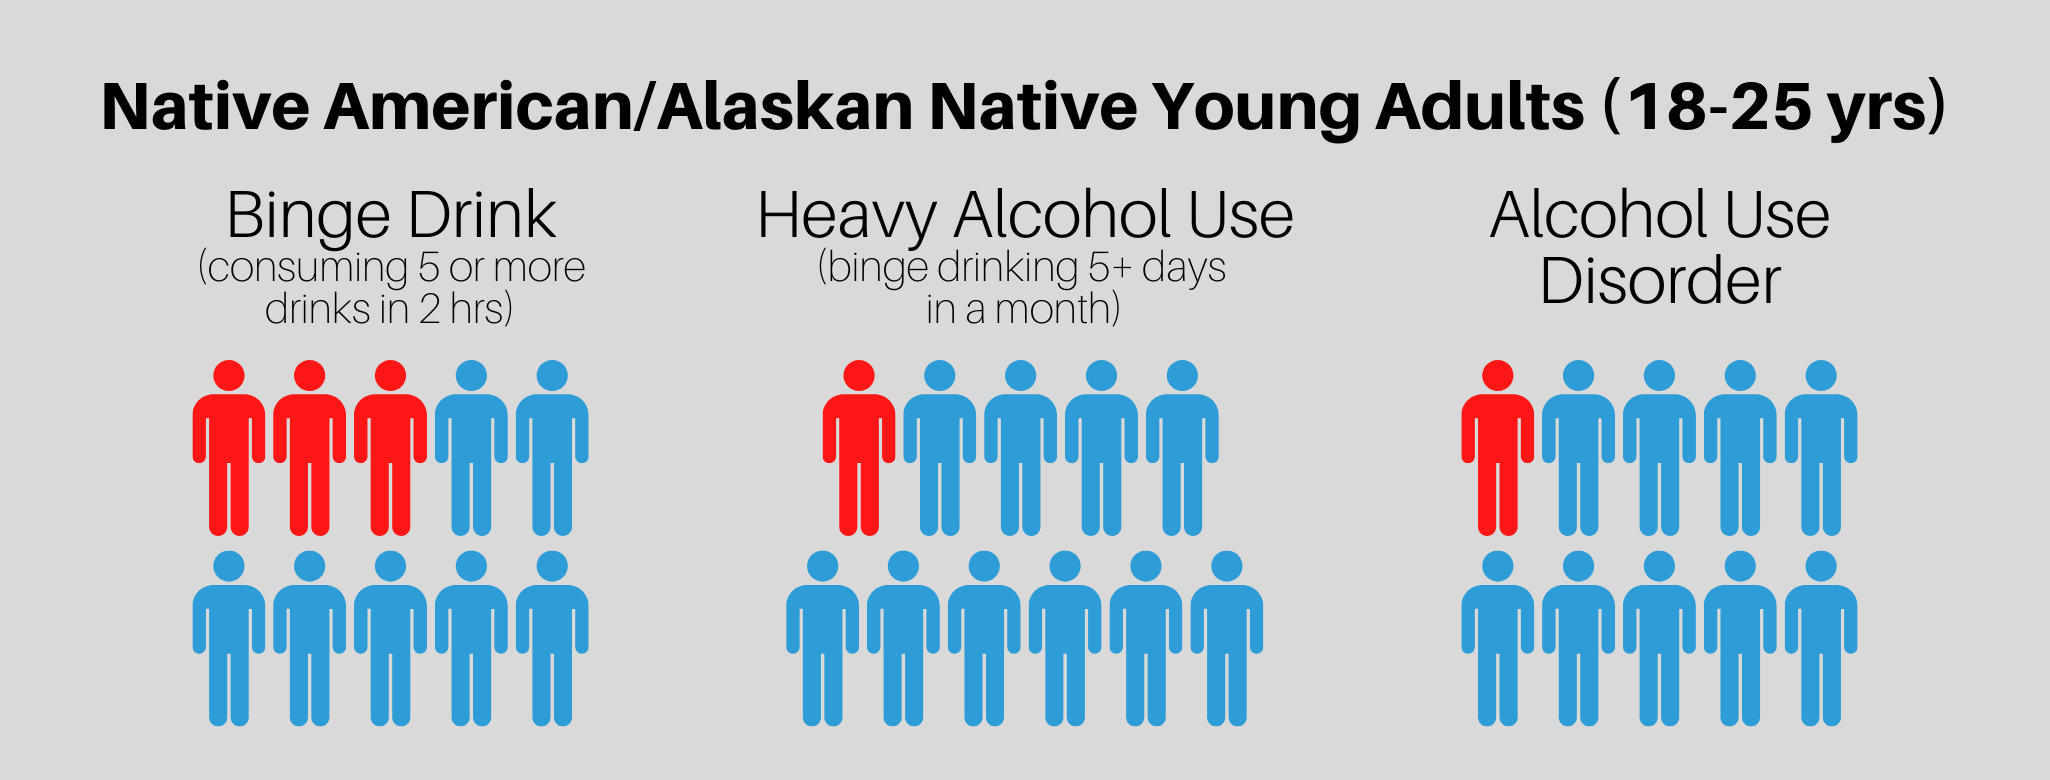 Heavy drinking that can lead to liver disease by young adults Native American or Alaskan Native